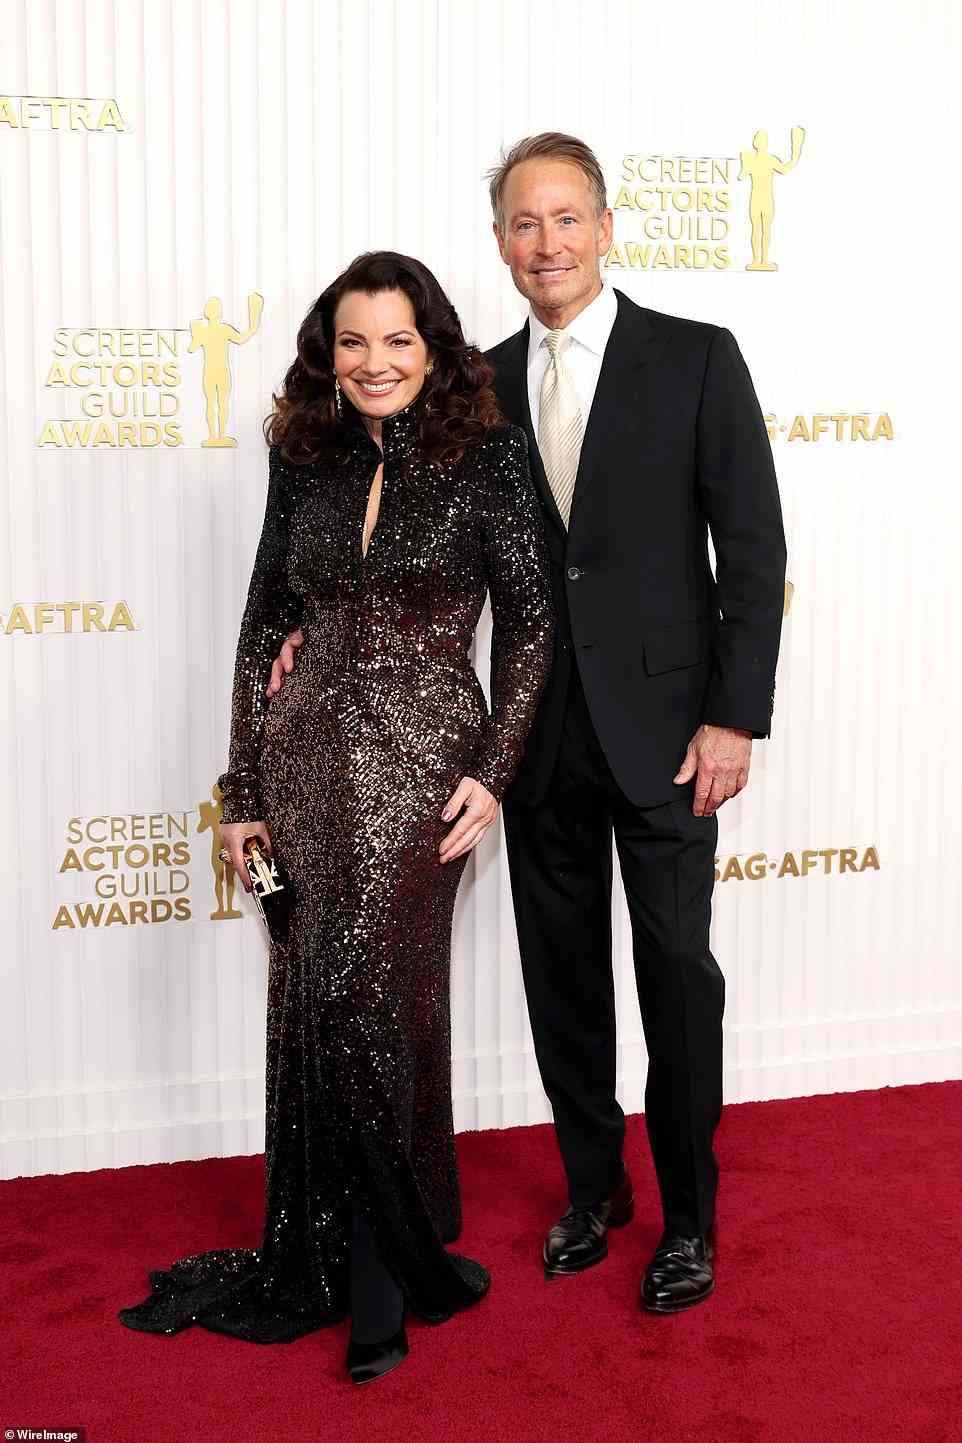 Glowing: Fran Drescher, who is the President of SAG=AFTRA, seen with her ex-husband Peter Marc Jacobson; they were childhood sweethearts but split in 1999; he came out as  gay after their split and they have remained close friends